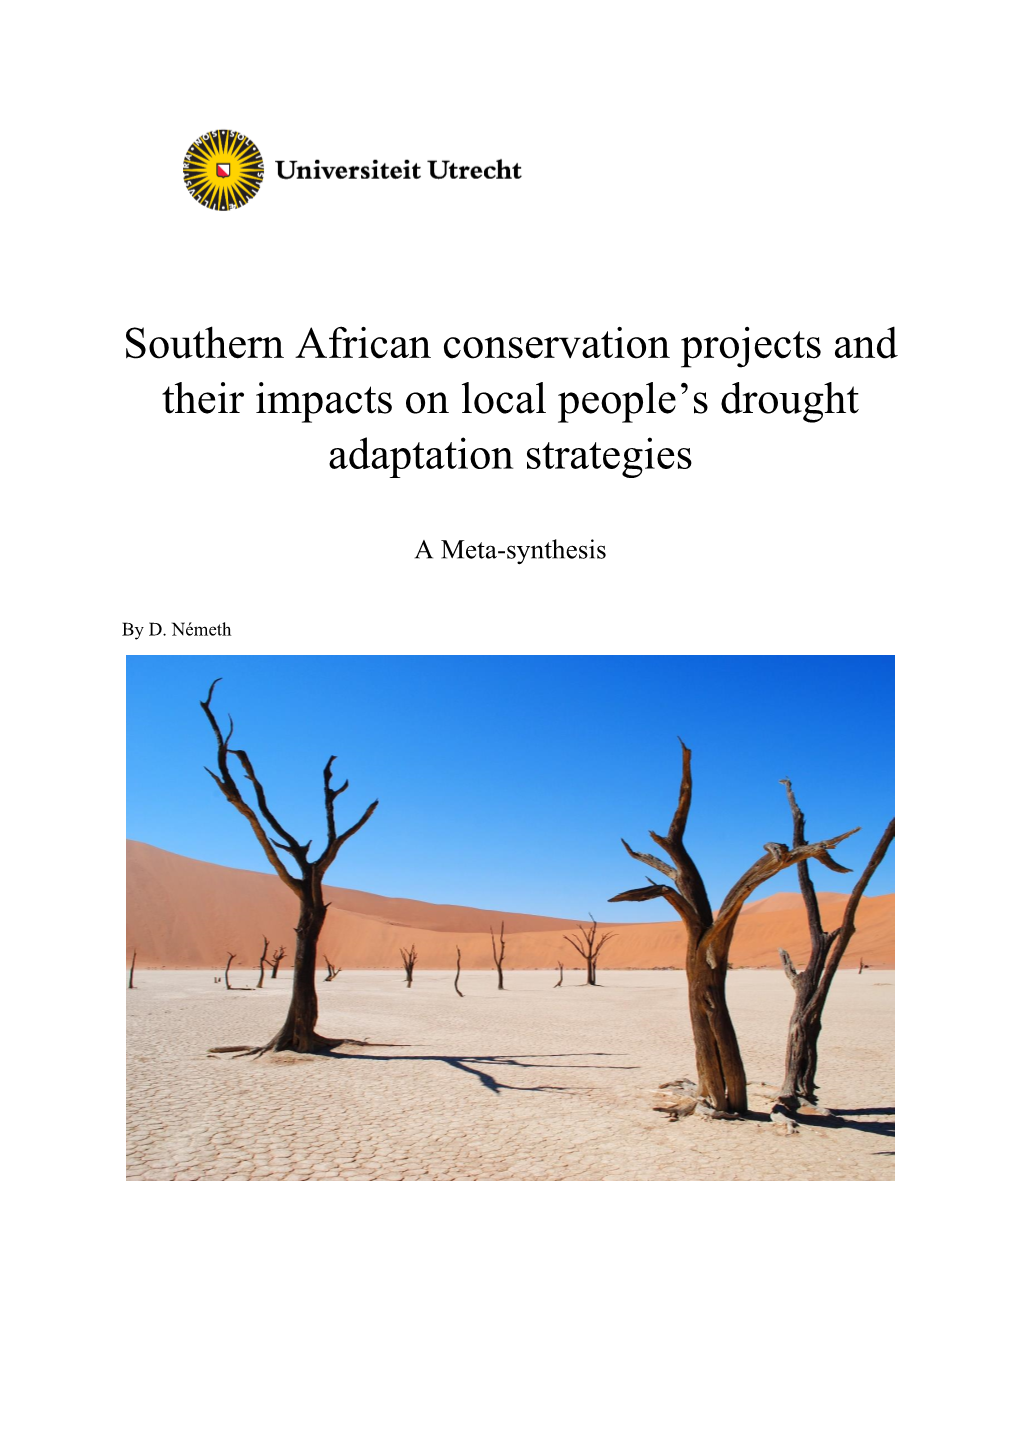 Southern African Conservation Projects and Their Impacts on Local People's Drought Adaptation Strategies